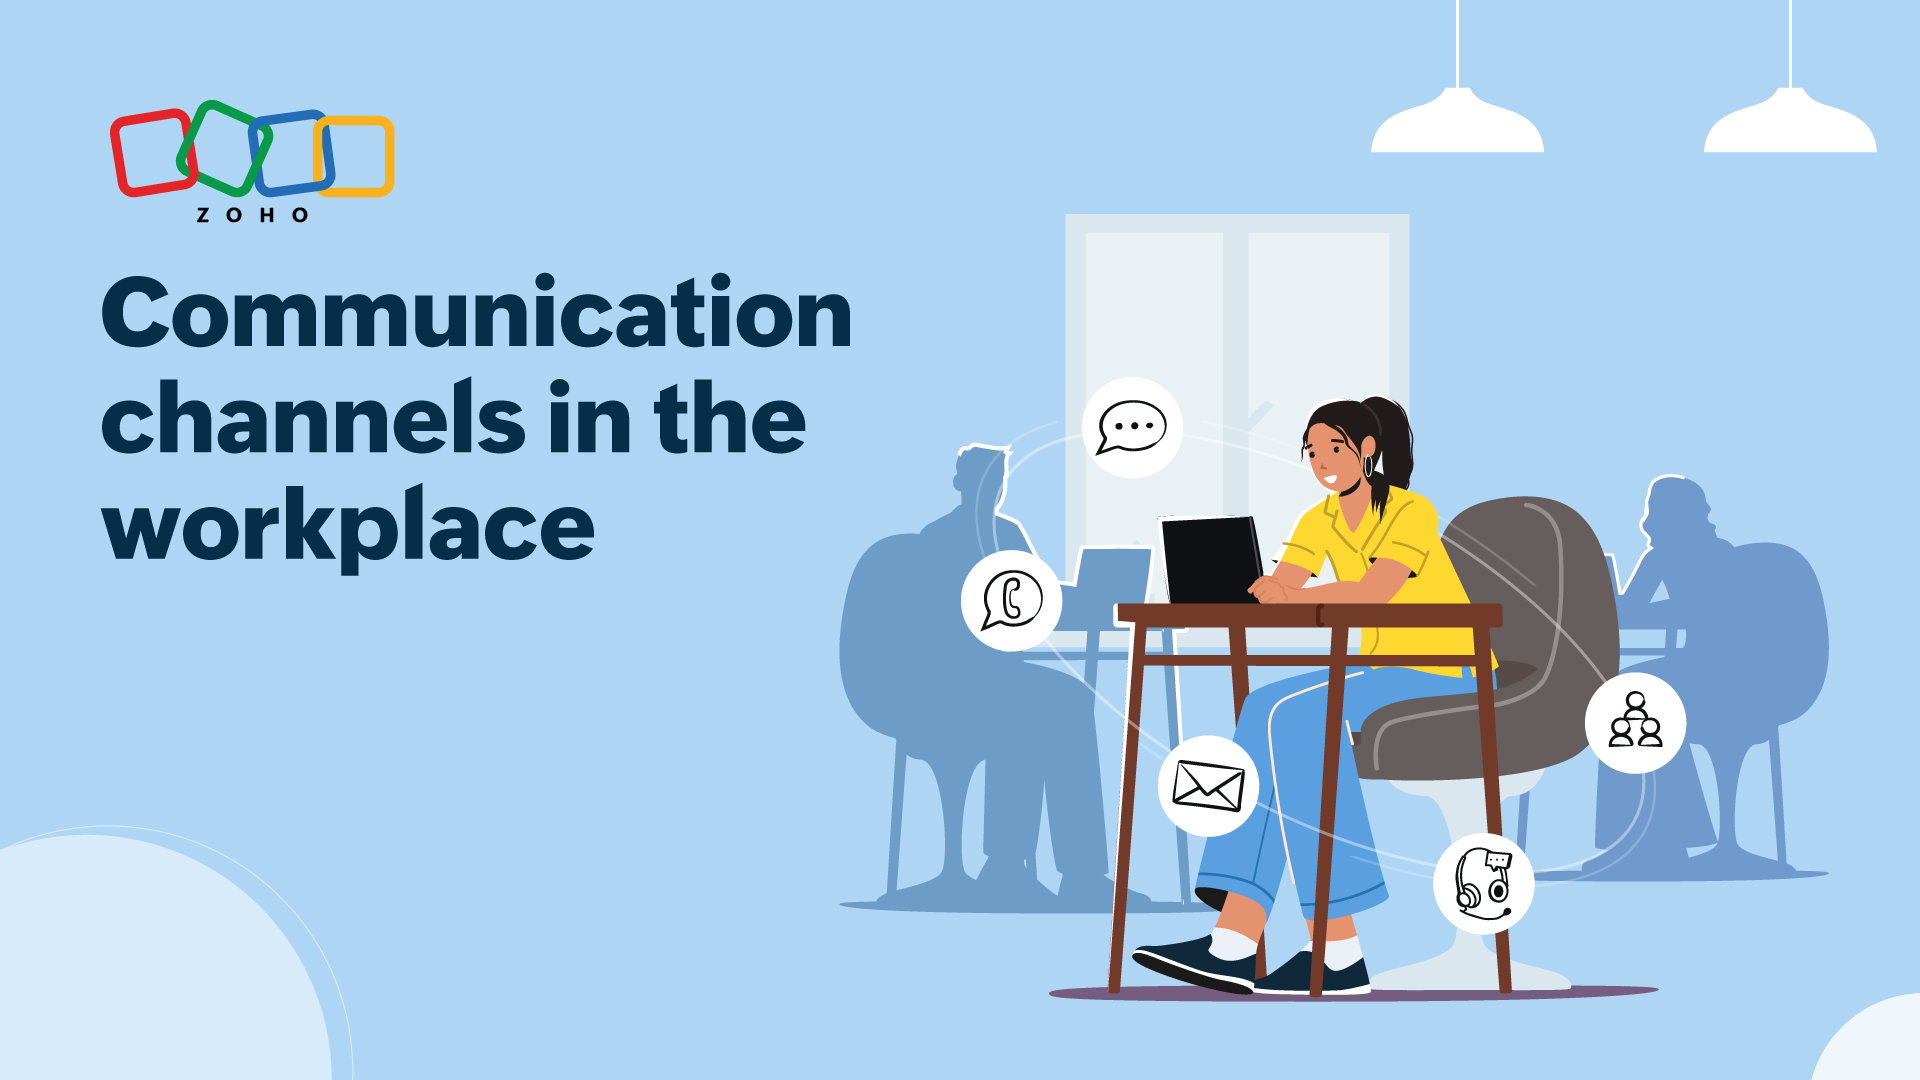 Communication channels in the workplace